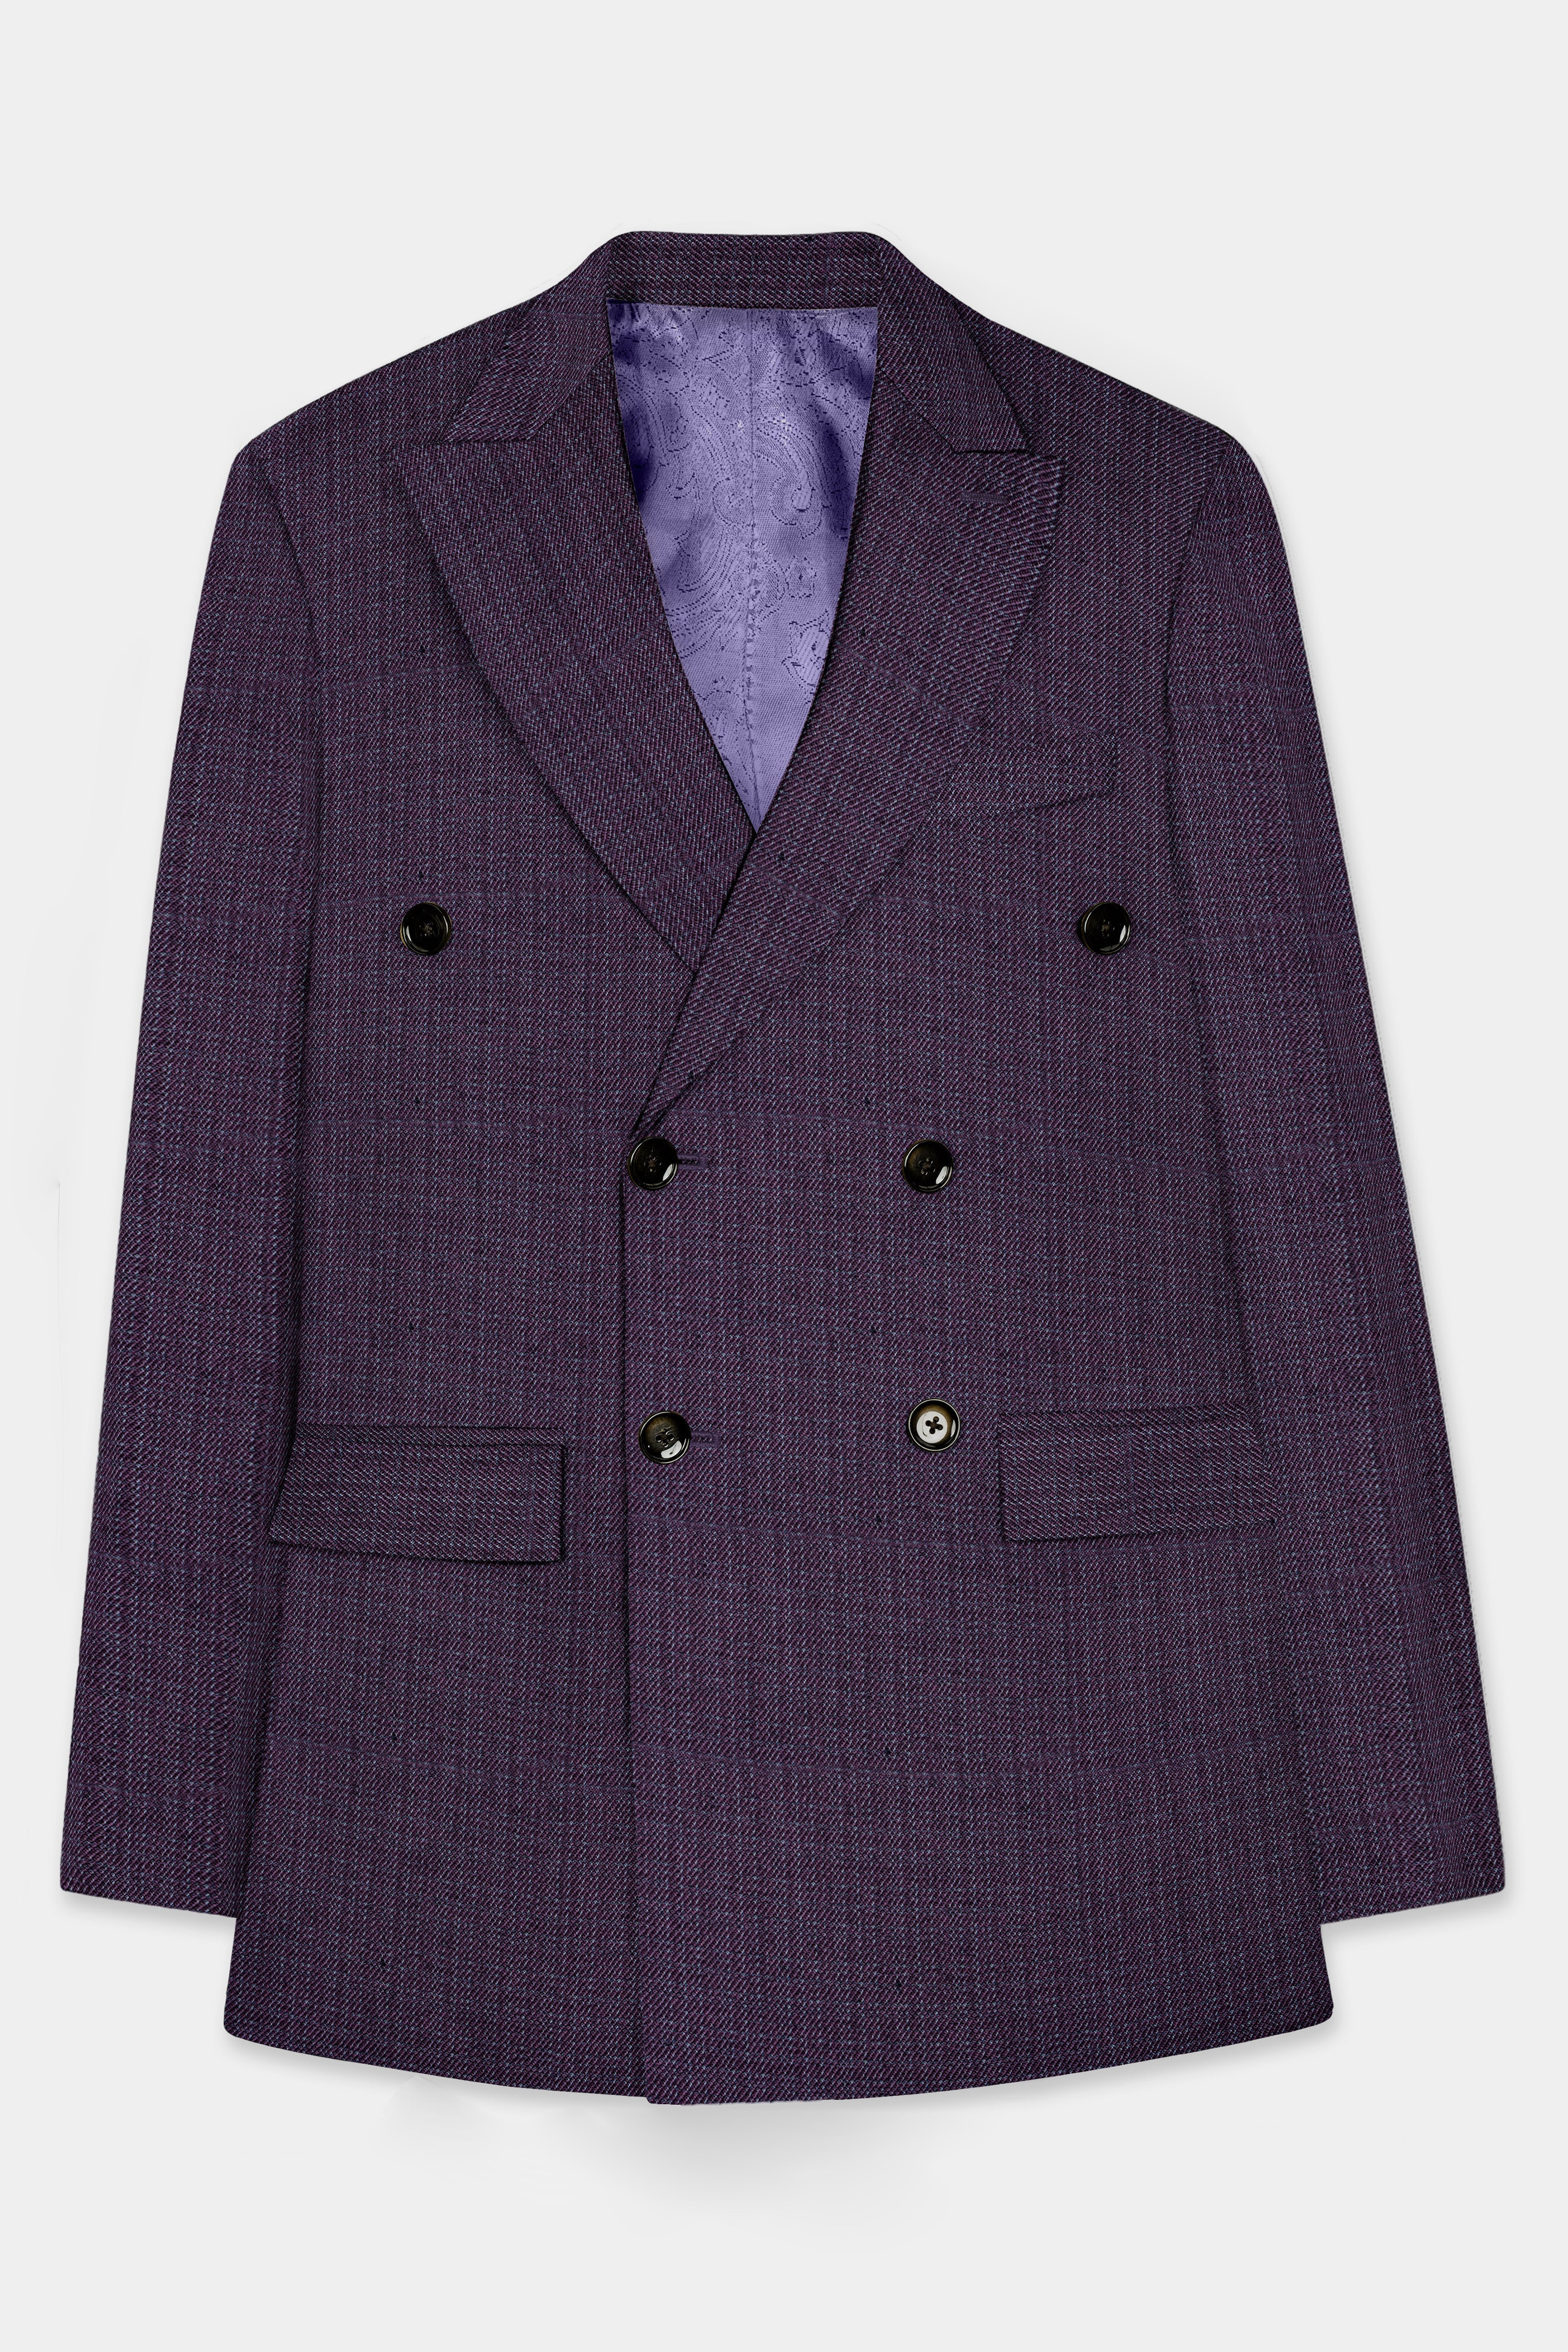 Blackcurrant Textured Wool Rich Double Breasted Blazer